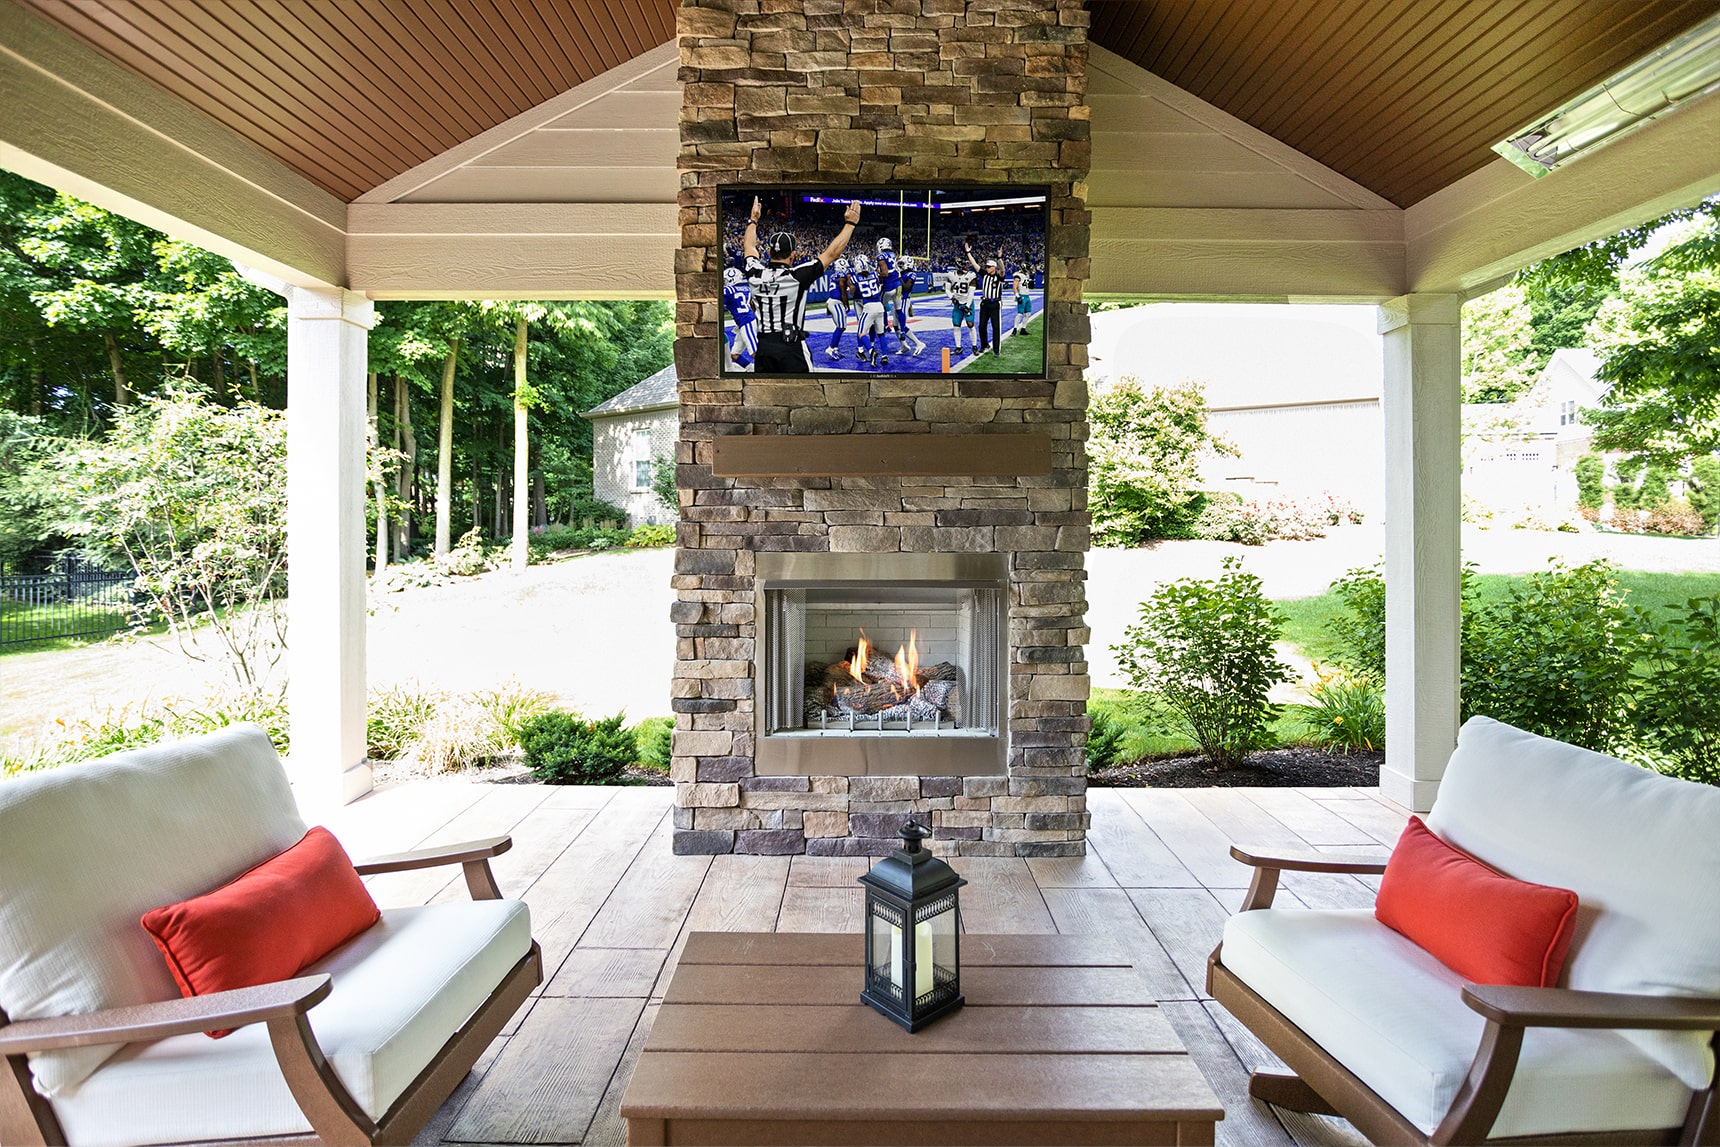 Covered Outdoor Living space with outdoor video technology